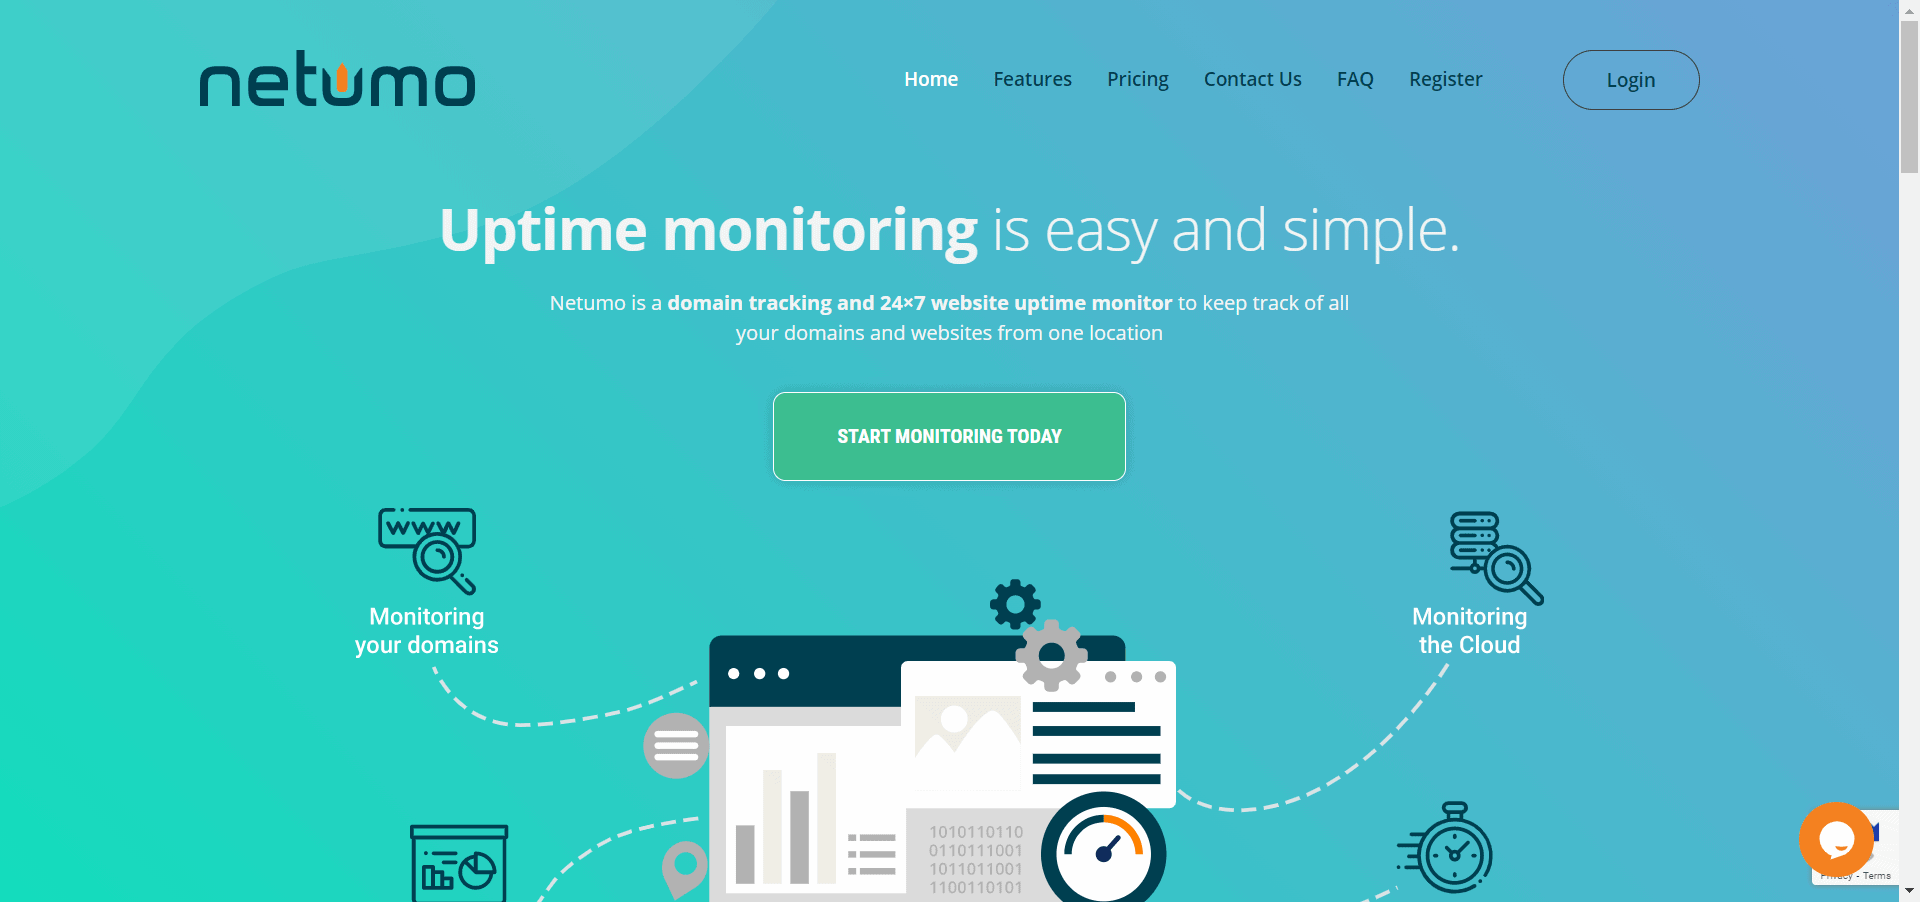 Netumo website monitoring tools review